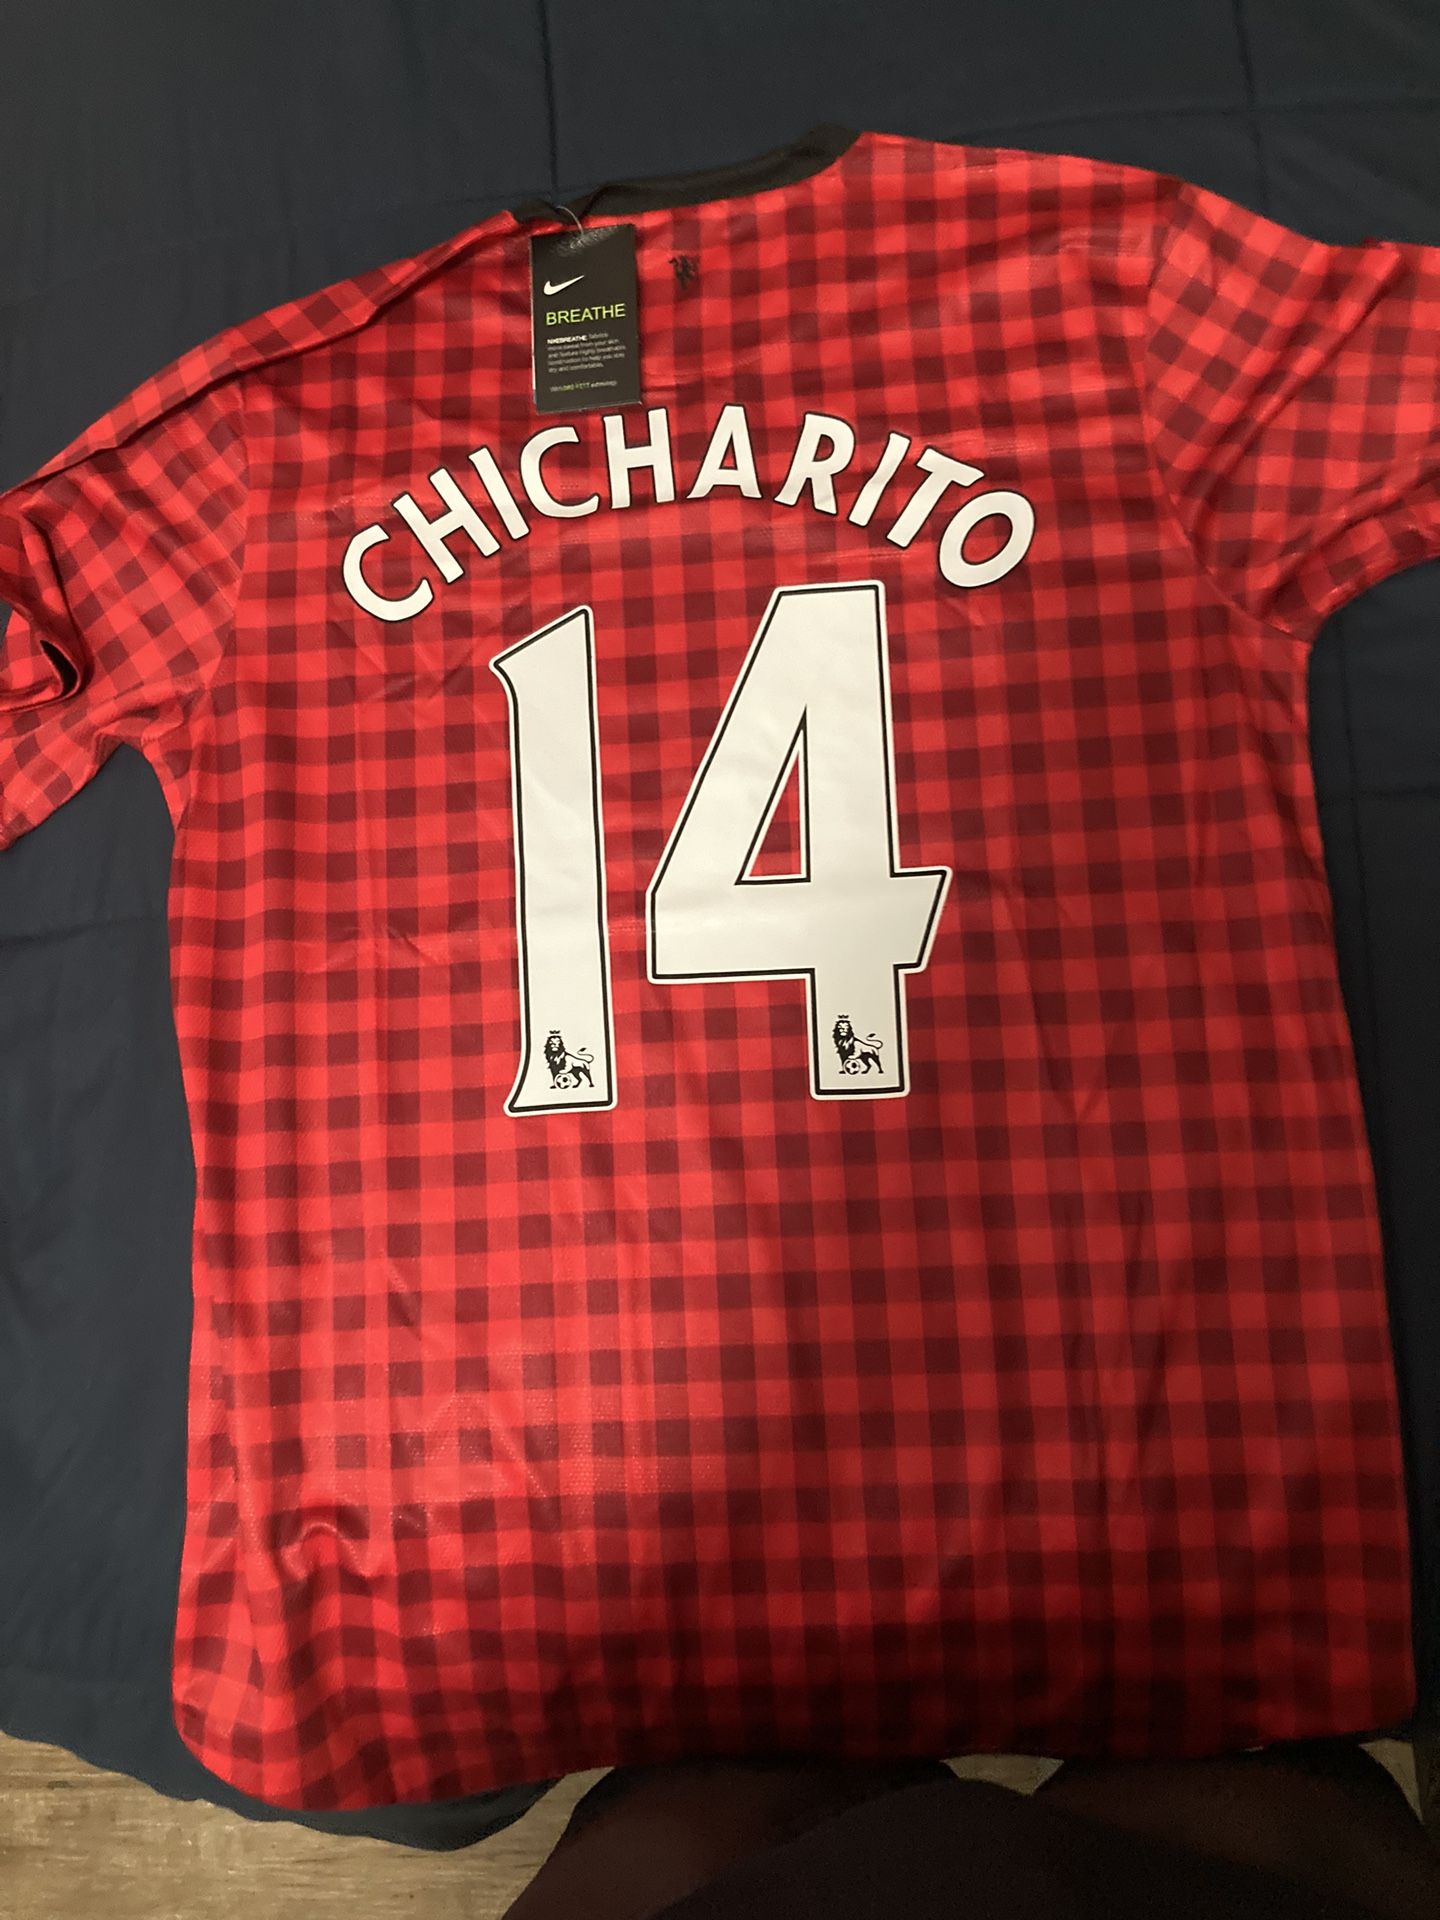 Mexico Chicharito 2014 Home Jersey for Sale in Lincoln Acres, CA - OfferUp